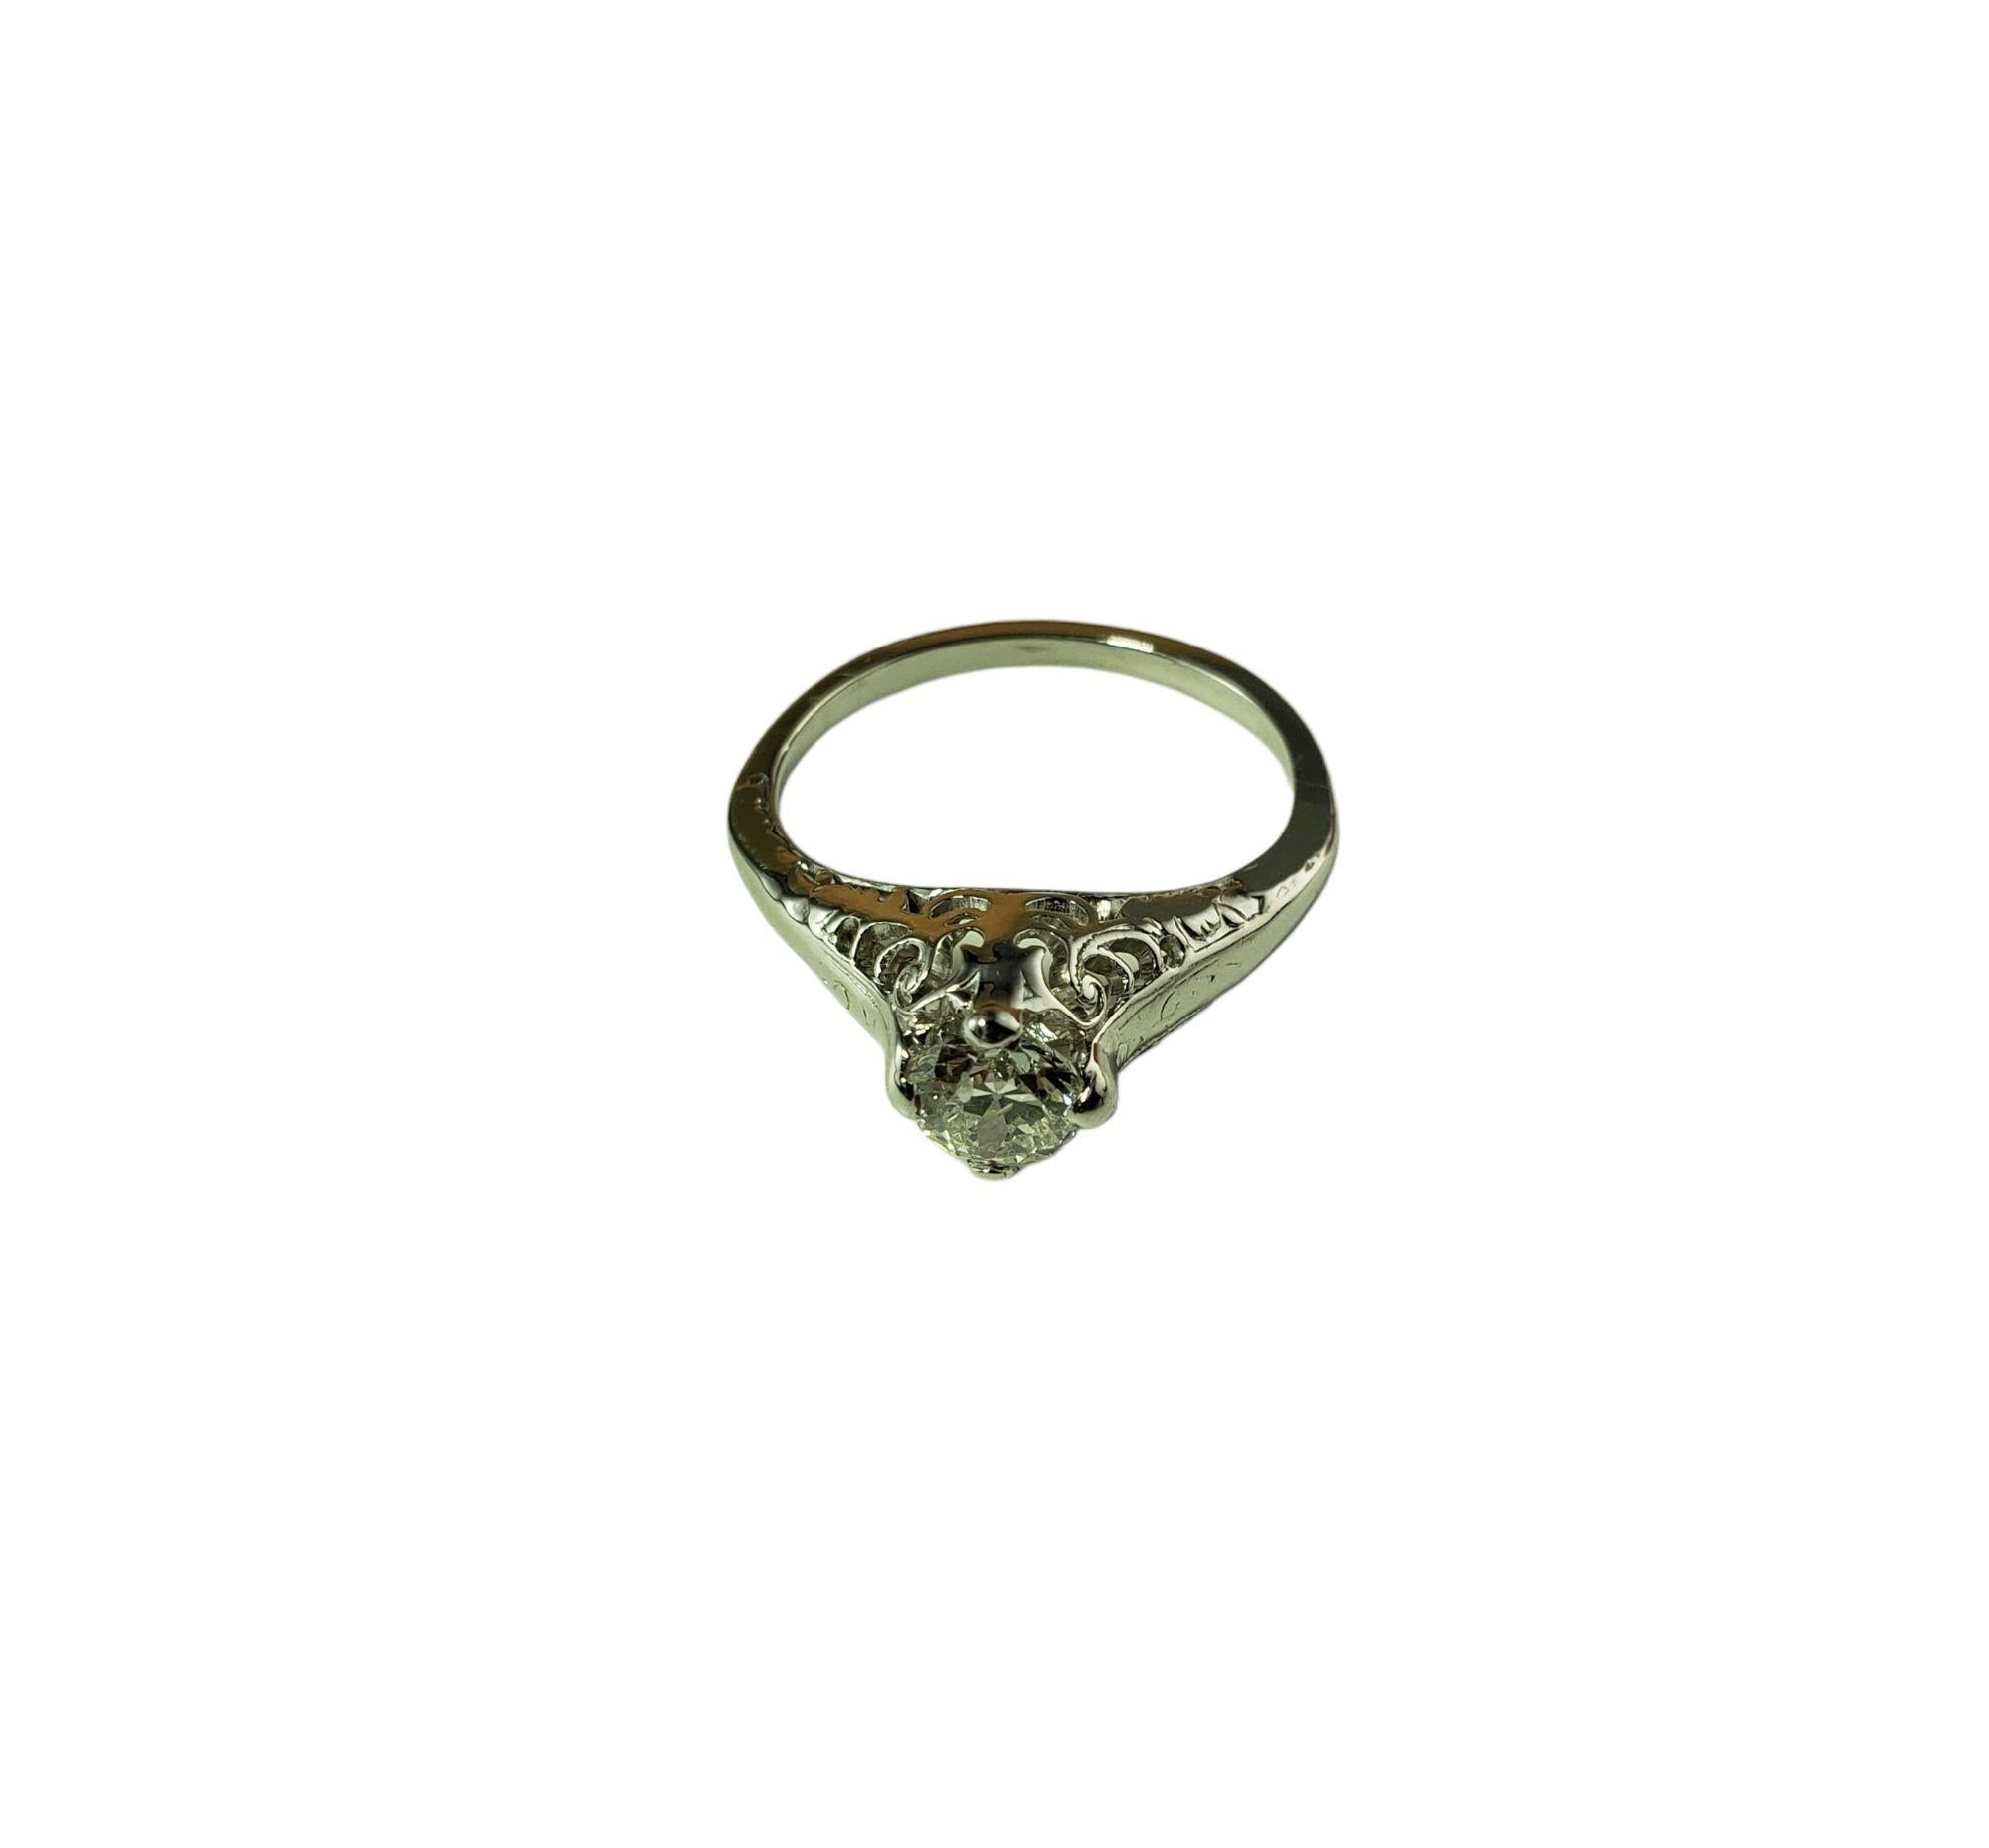 This sparkling ring features one round old mine cut diamond set in beautifully detailed 14K white gold.

Height: 9 mm. Width: 7 mm.

Shank: 2 mm.

Approximate total diamond weight: .50 ct.

Diamond color: J

Diamond clarity: SI2

Size: 7

Weight: 